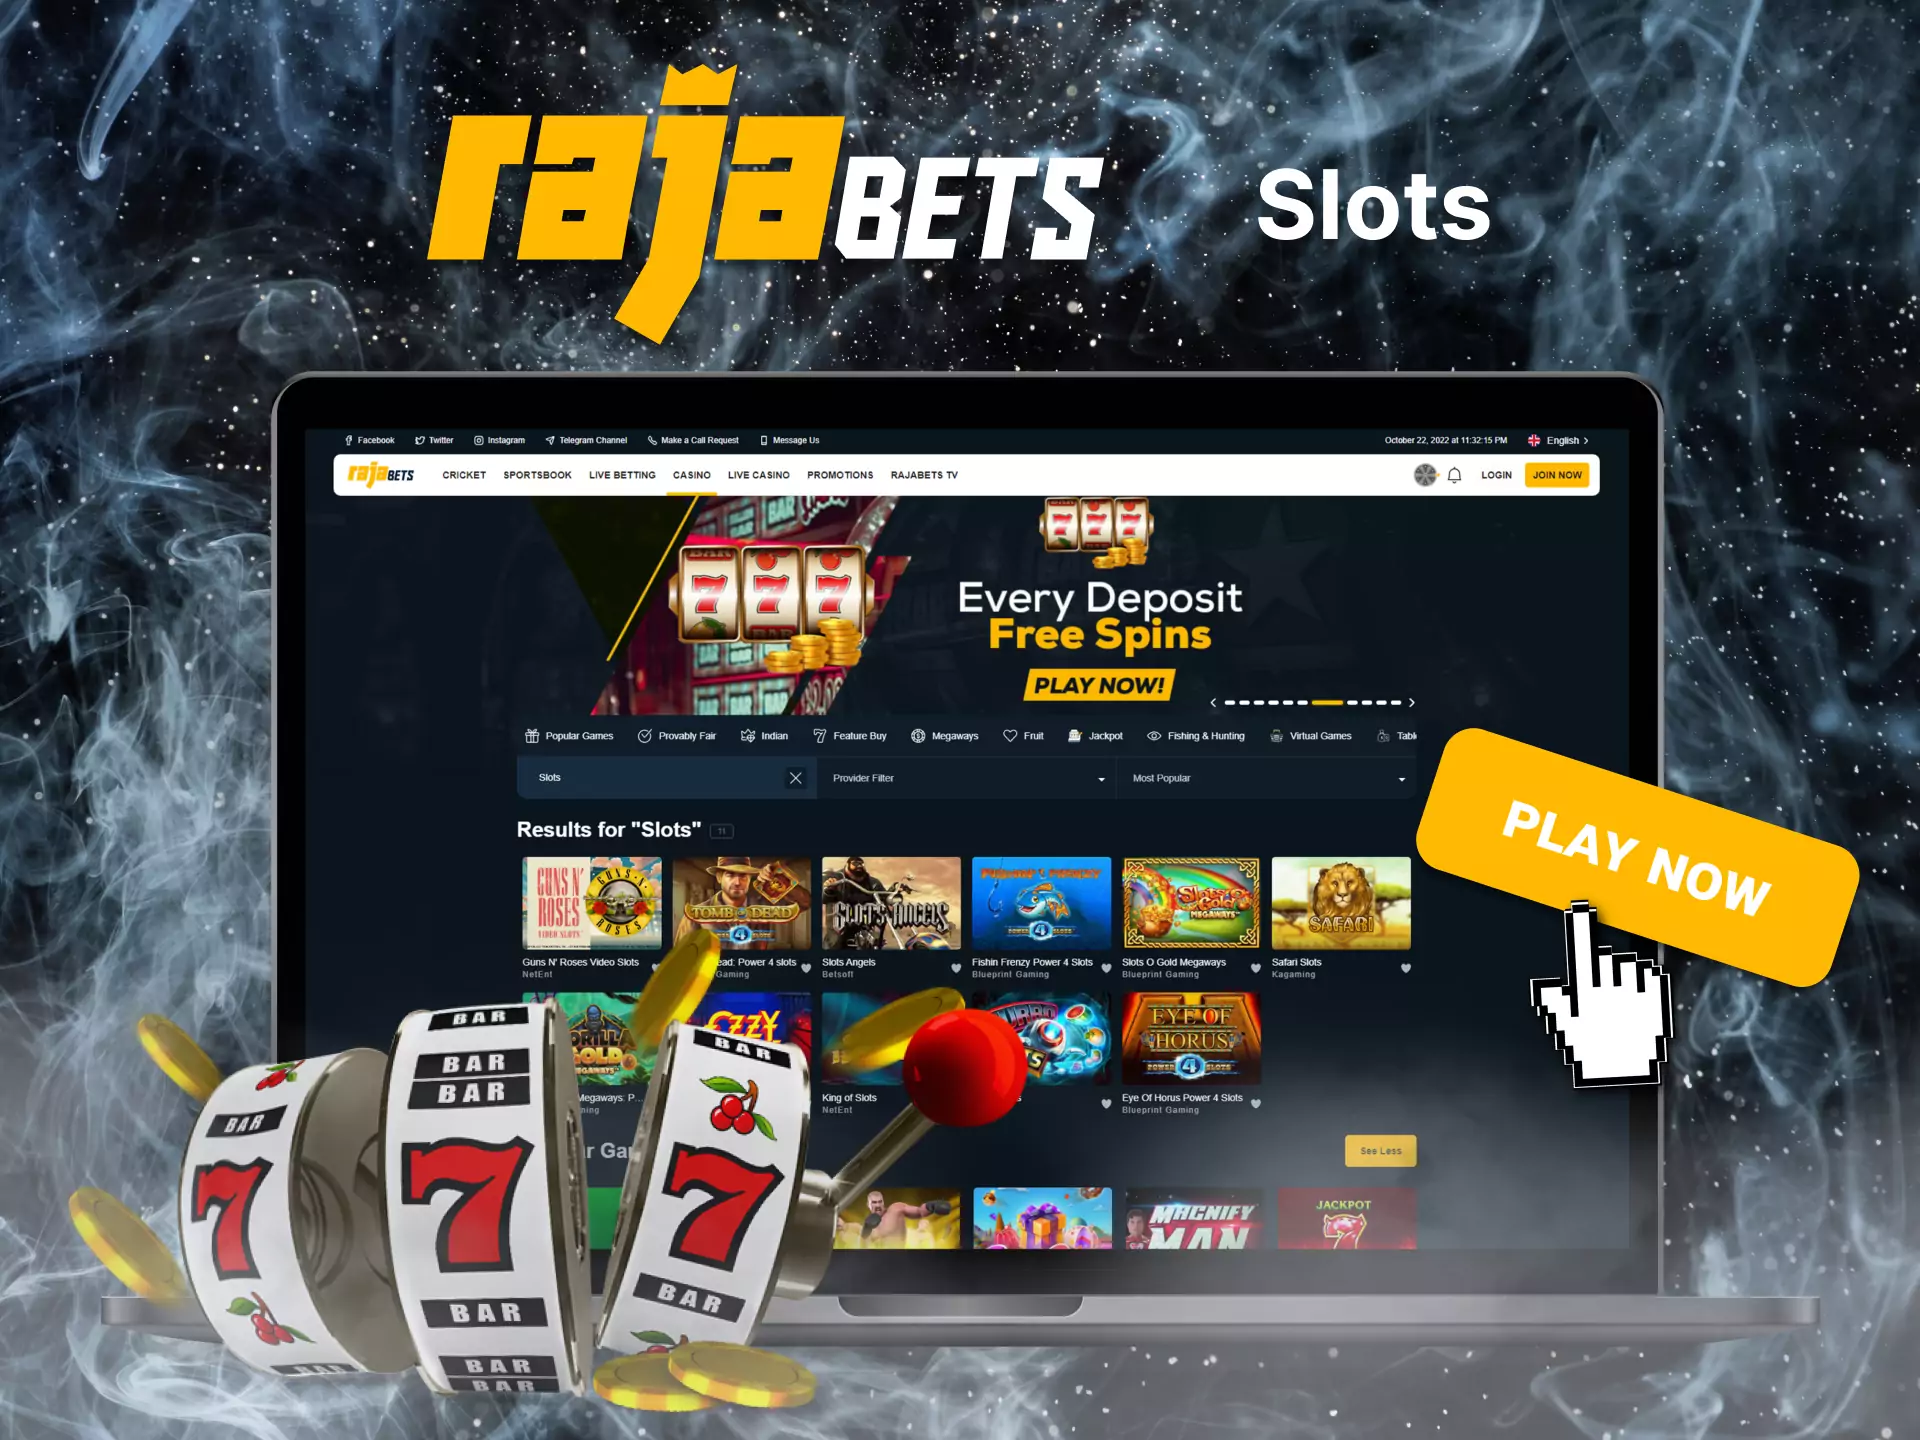 Try different slots games in Rajabets.